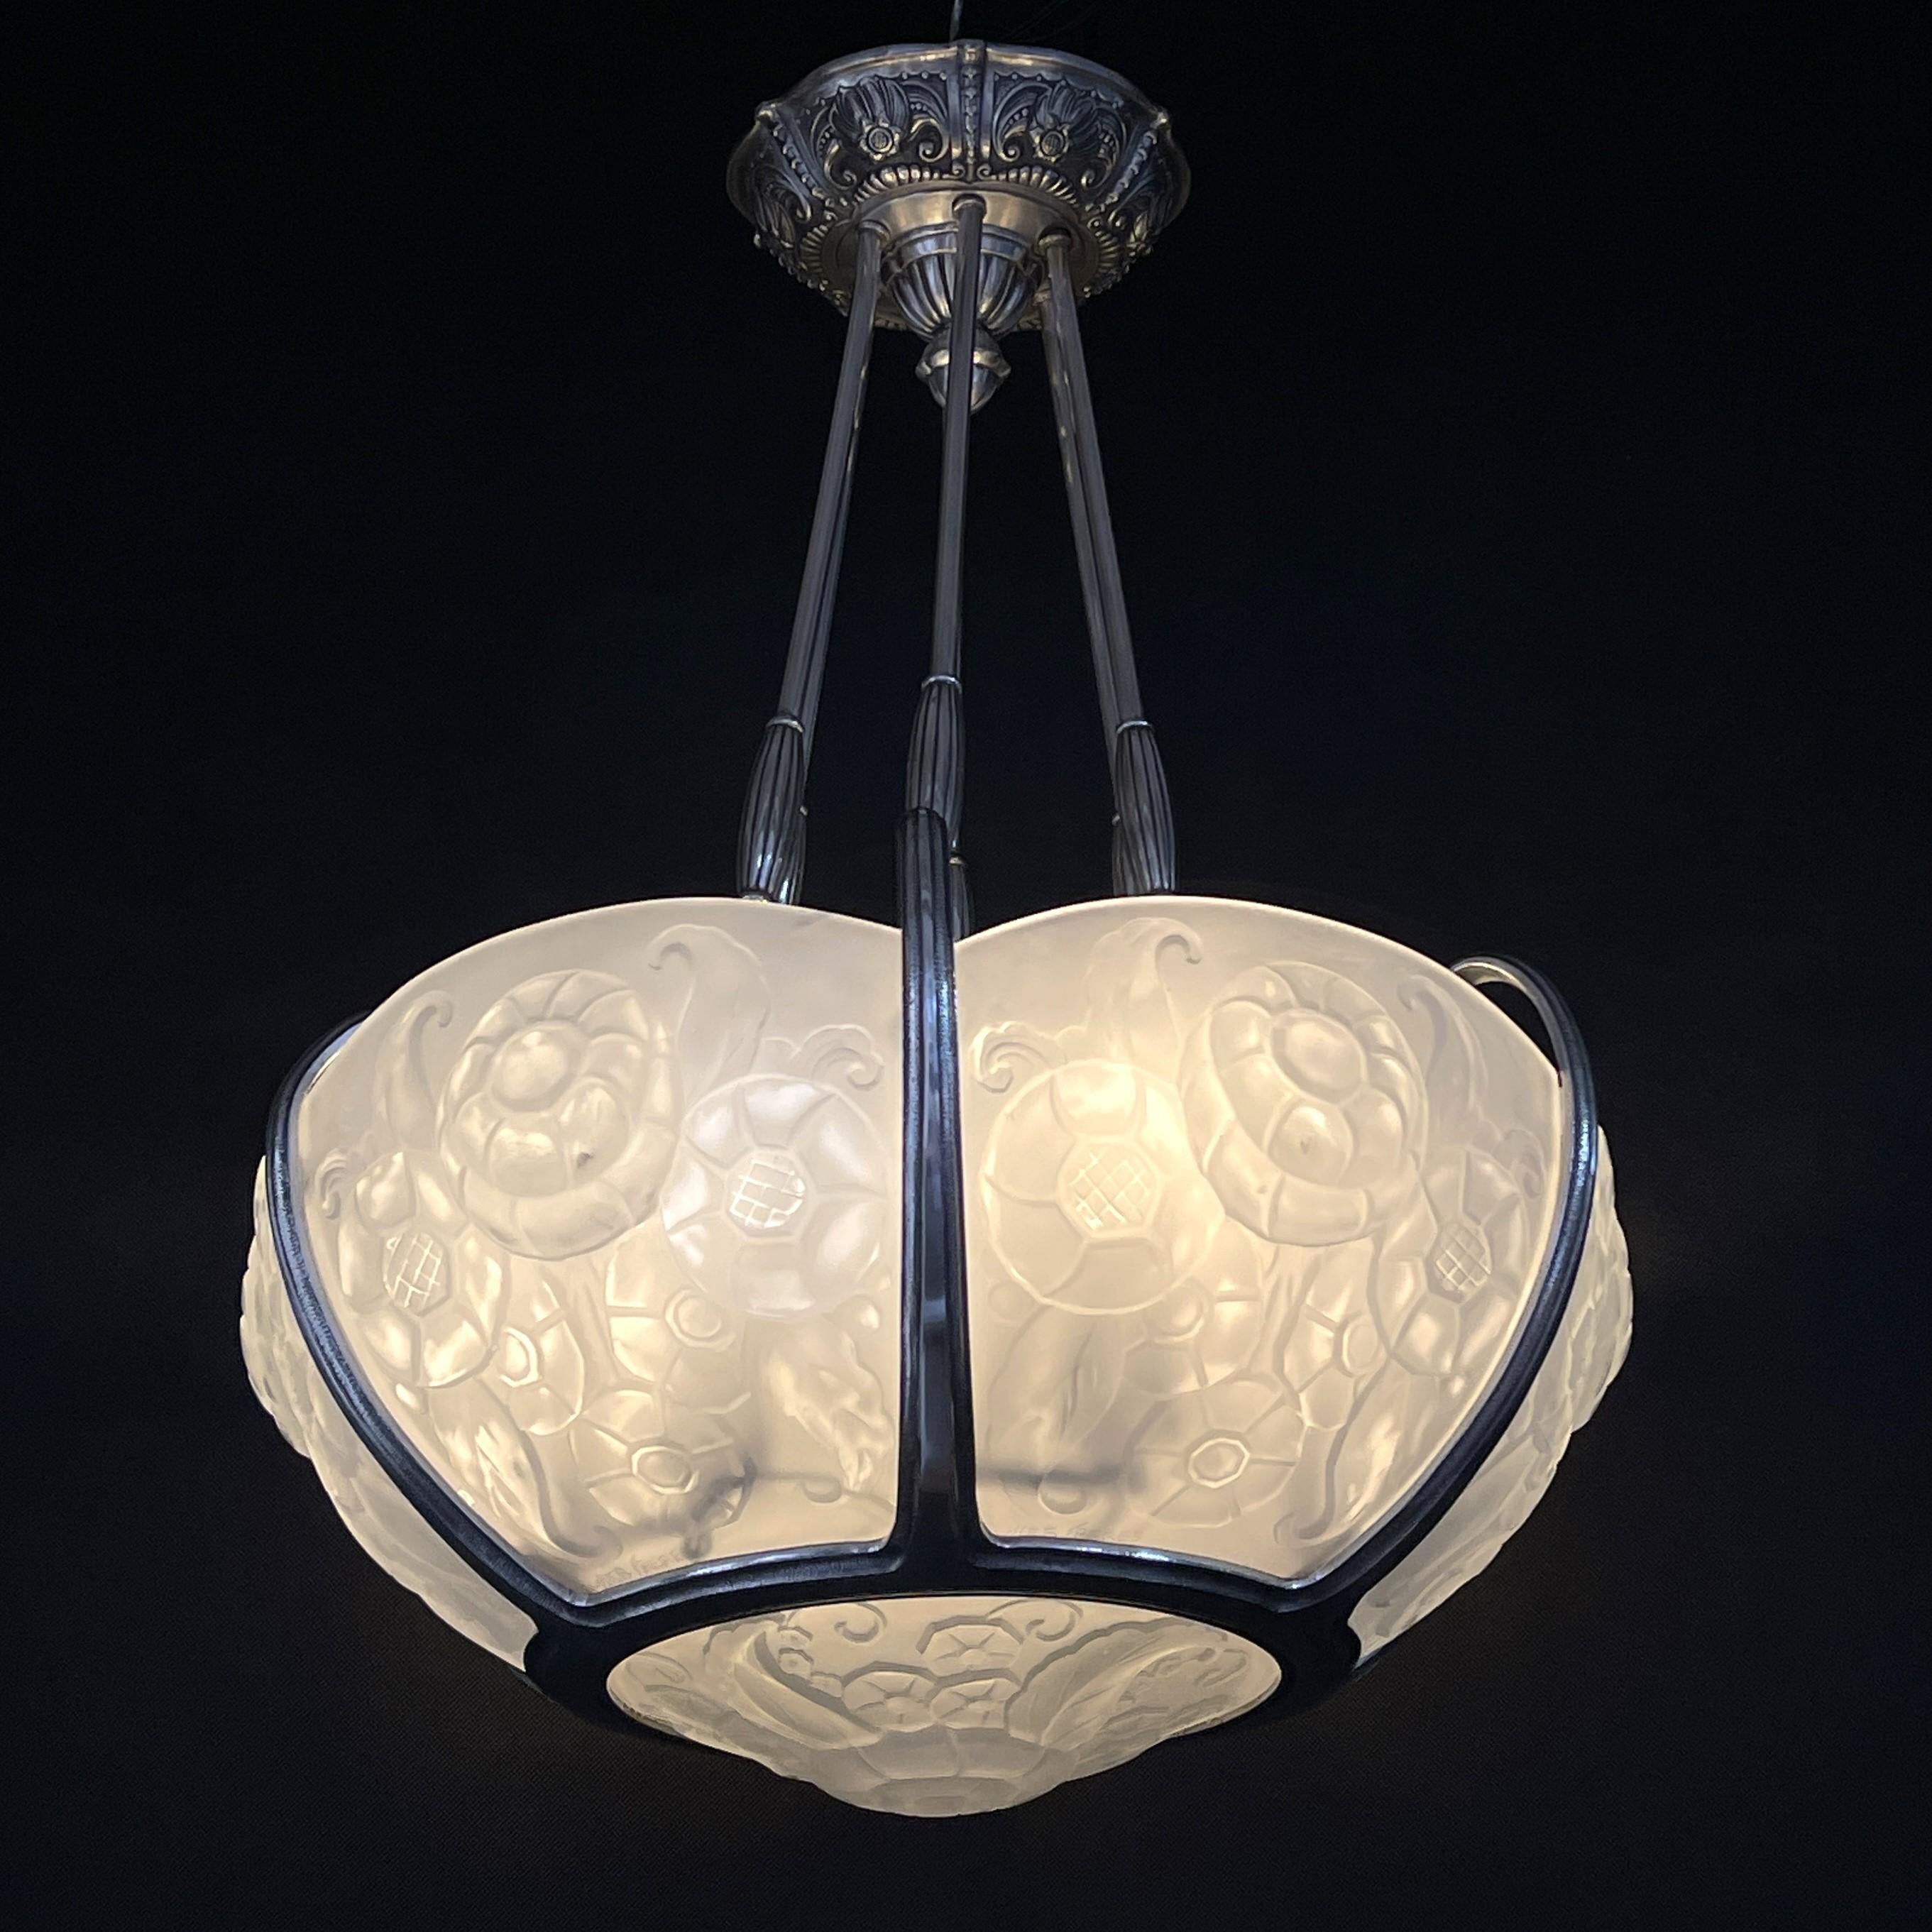 French Art Deco Chandelier by Muller Freres, Luneville, Nickel-Plated, 1920s/1930s For Sale